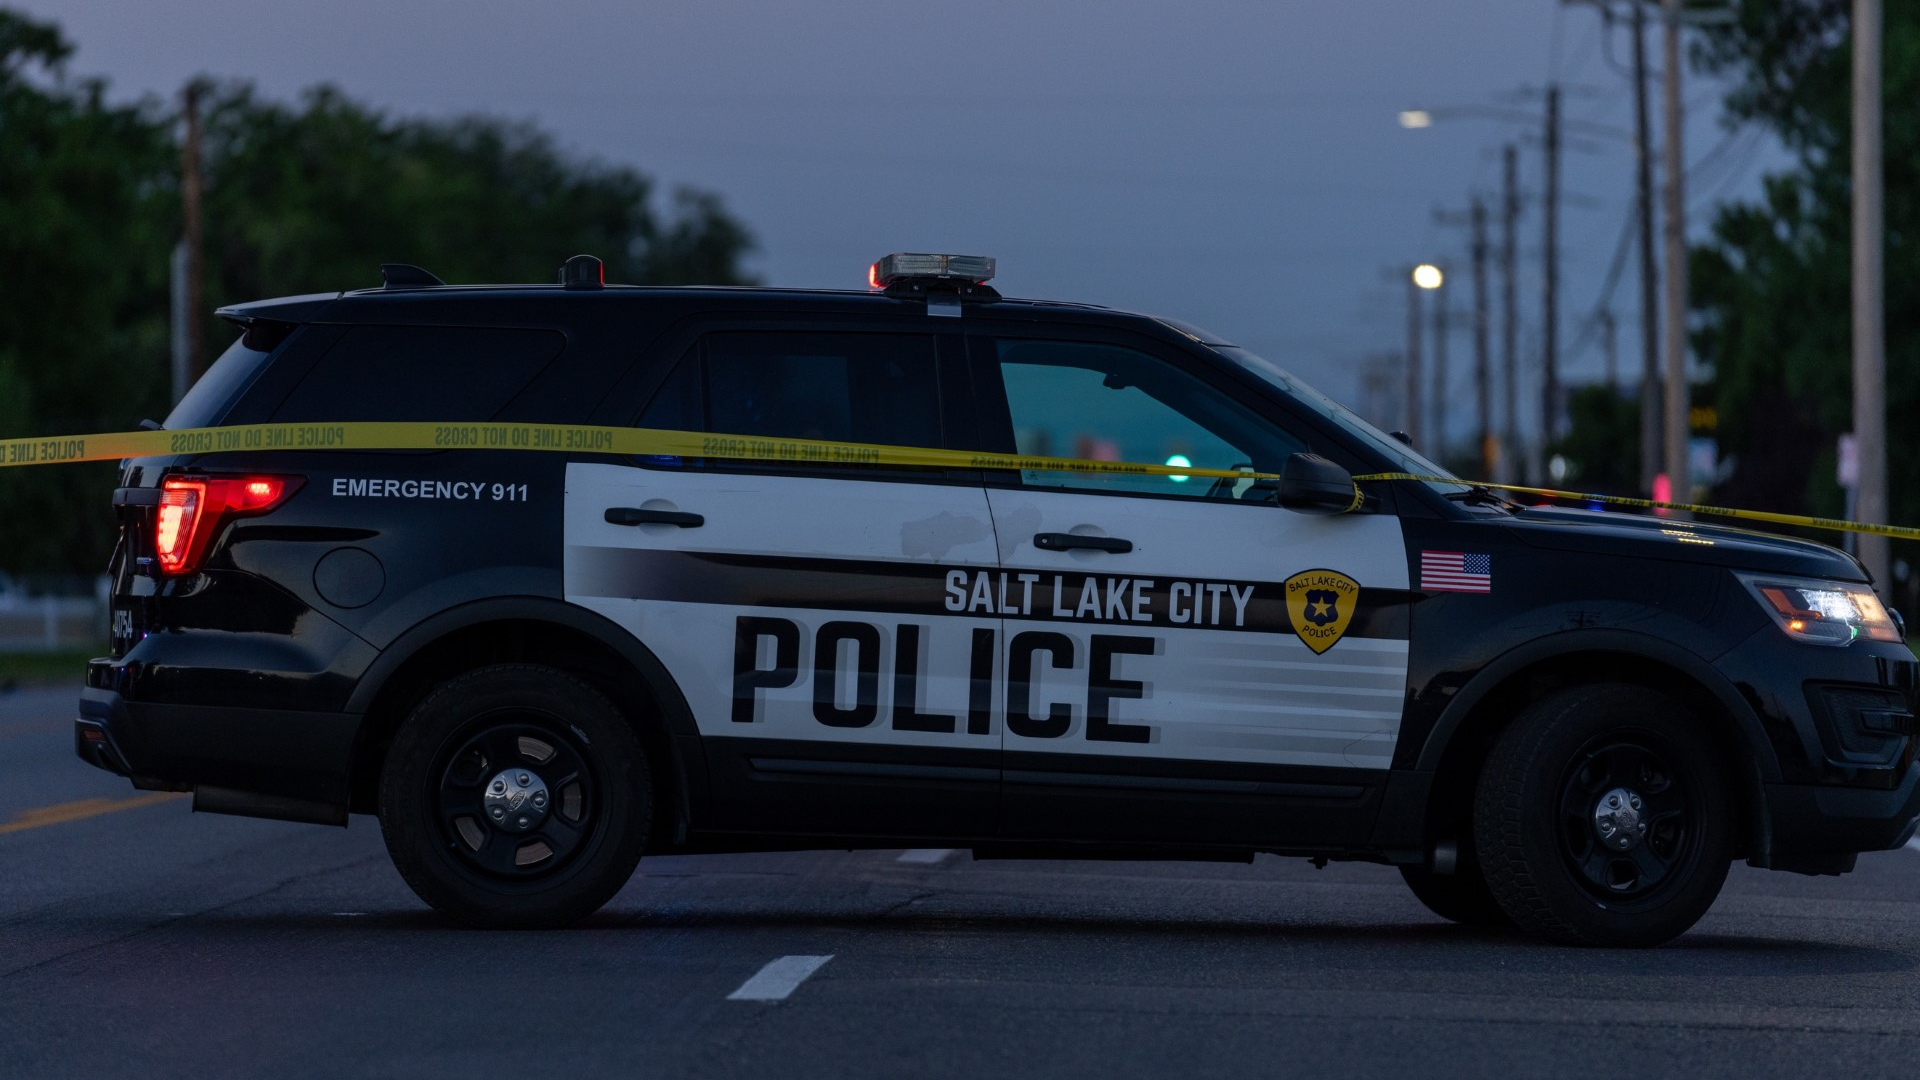 SALT LAKE CITY -- Salt Lake City police said one person is recovering from non-life-threatening inj...